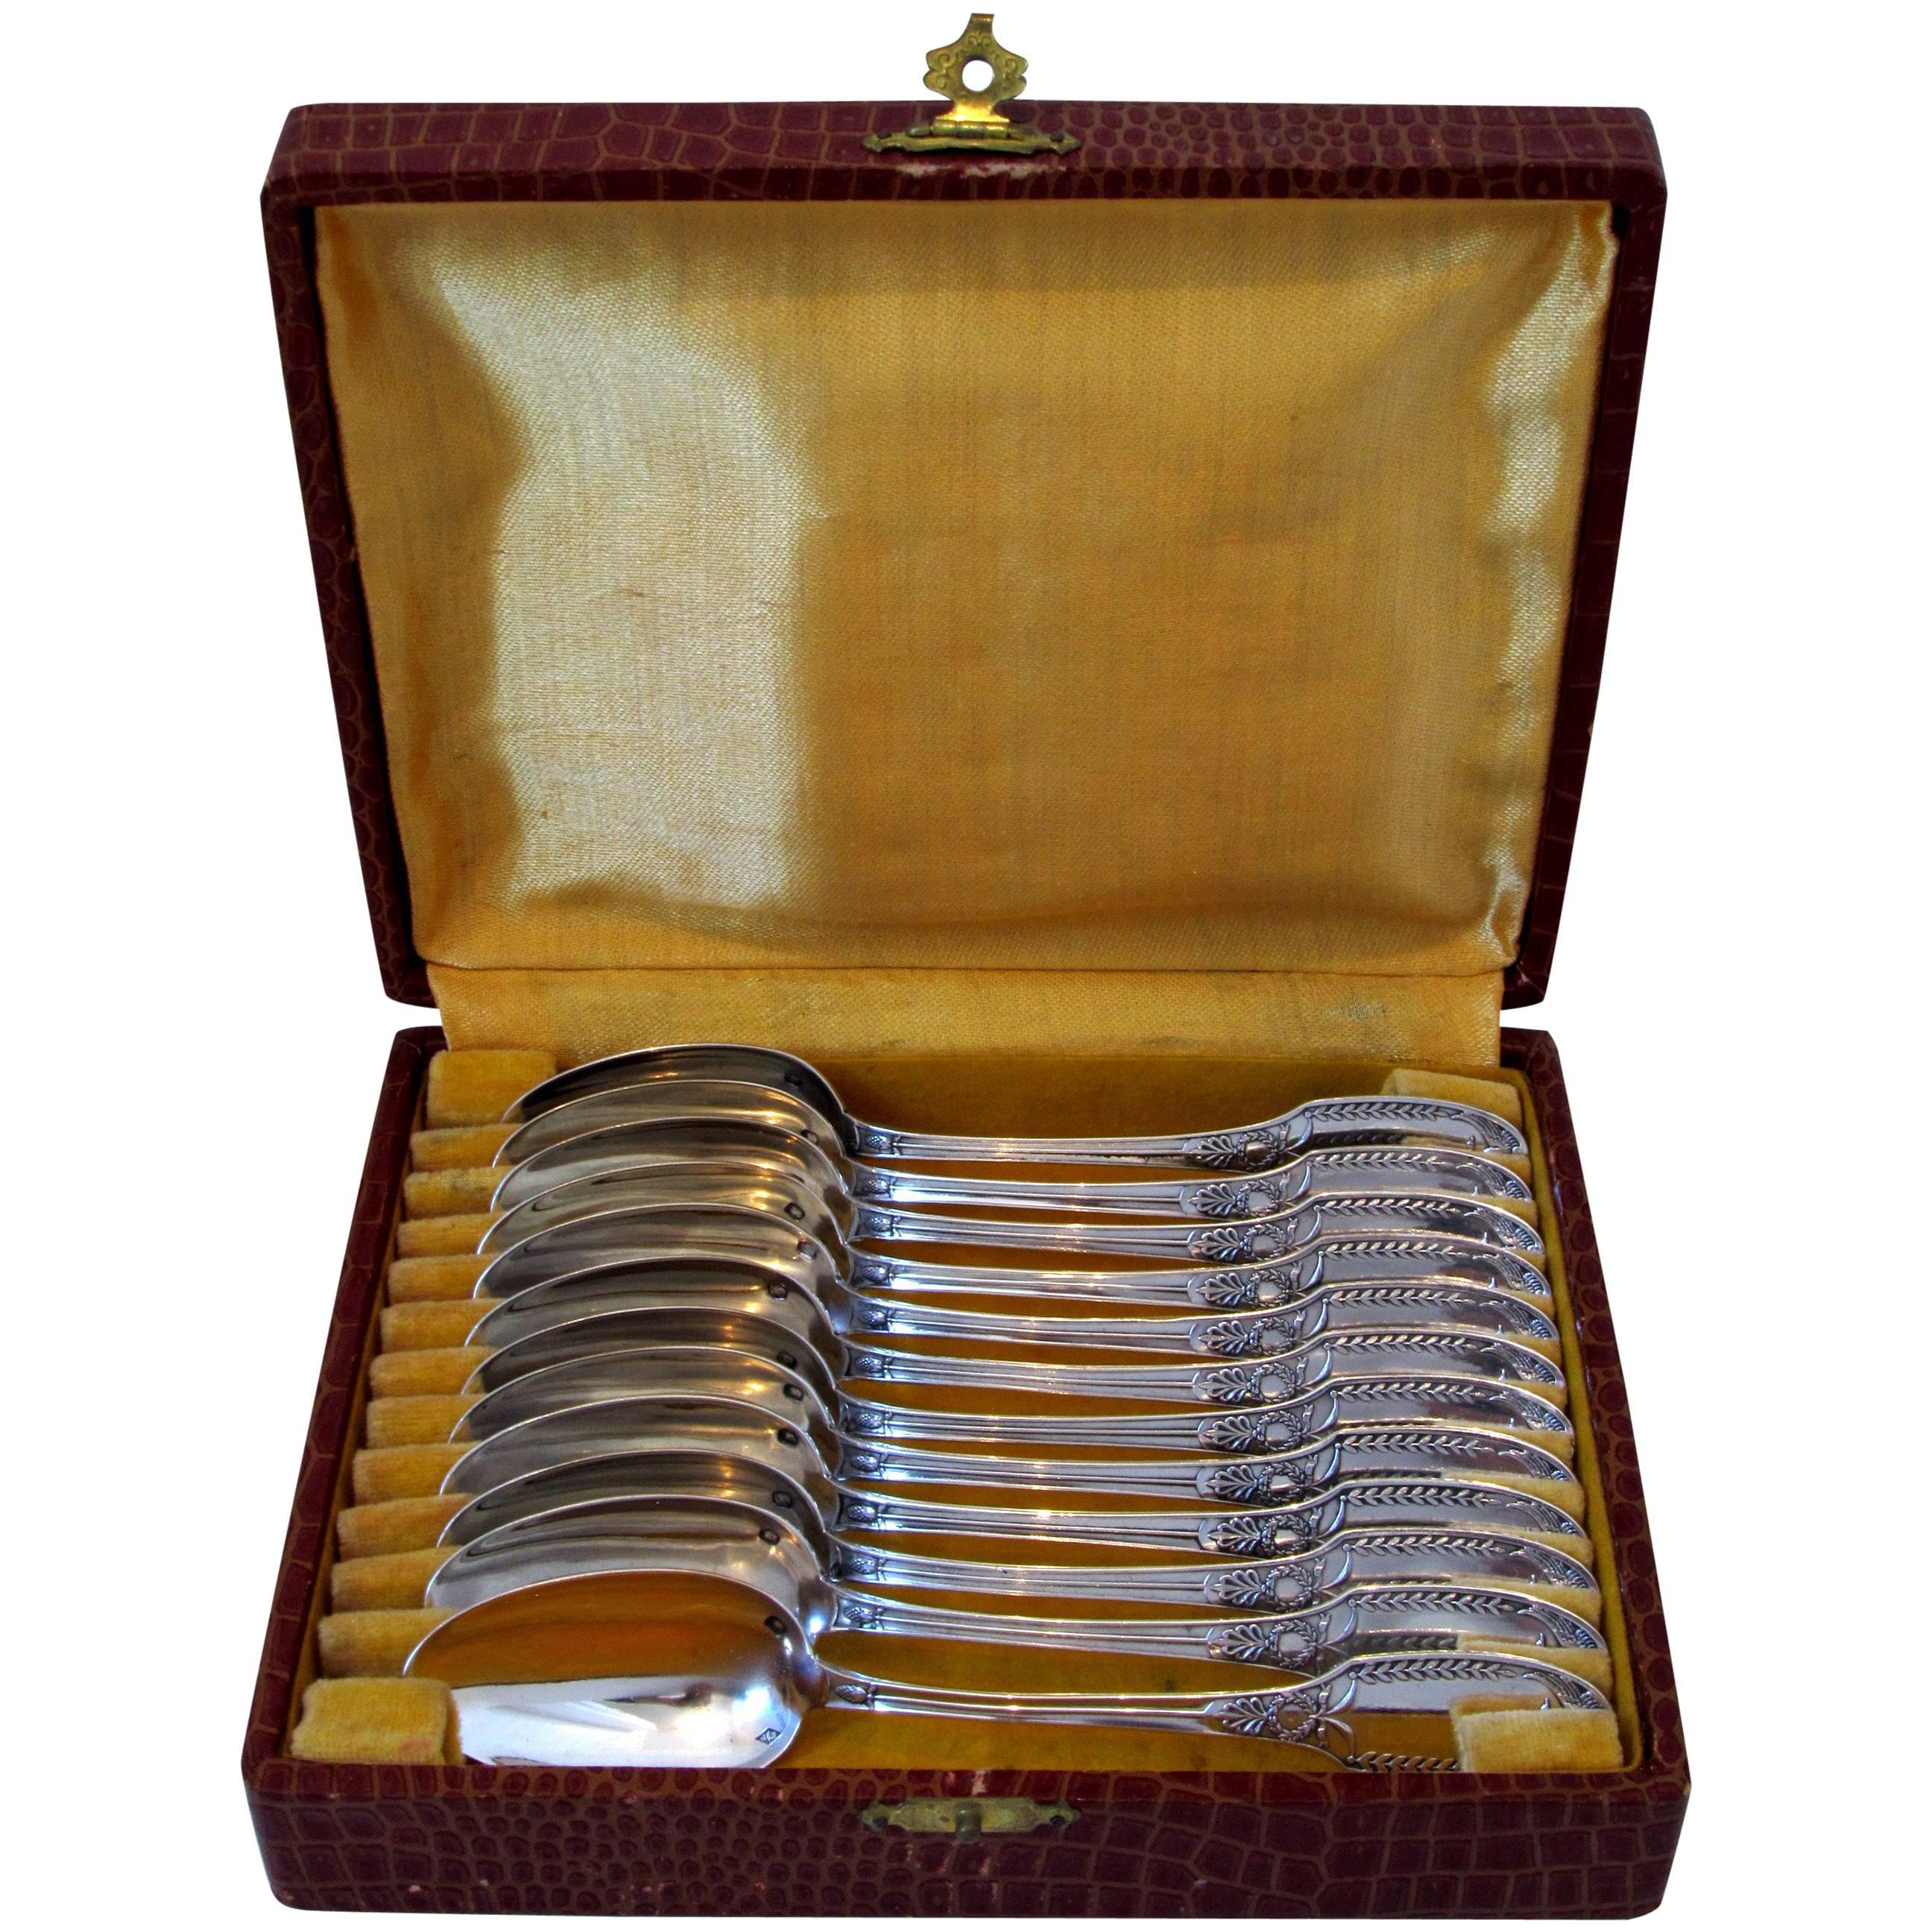 Puiforcat Rare French Sterling Silver Tea or Coffee Spoons Set 12 pc box Swans